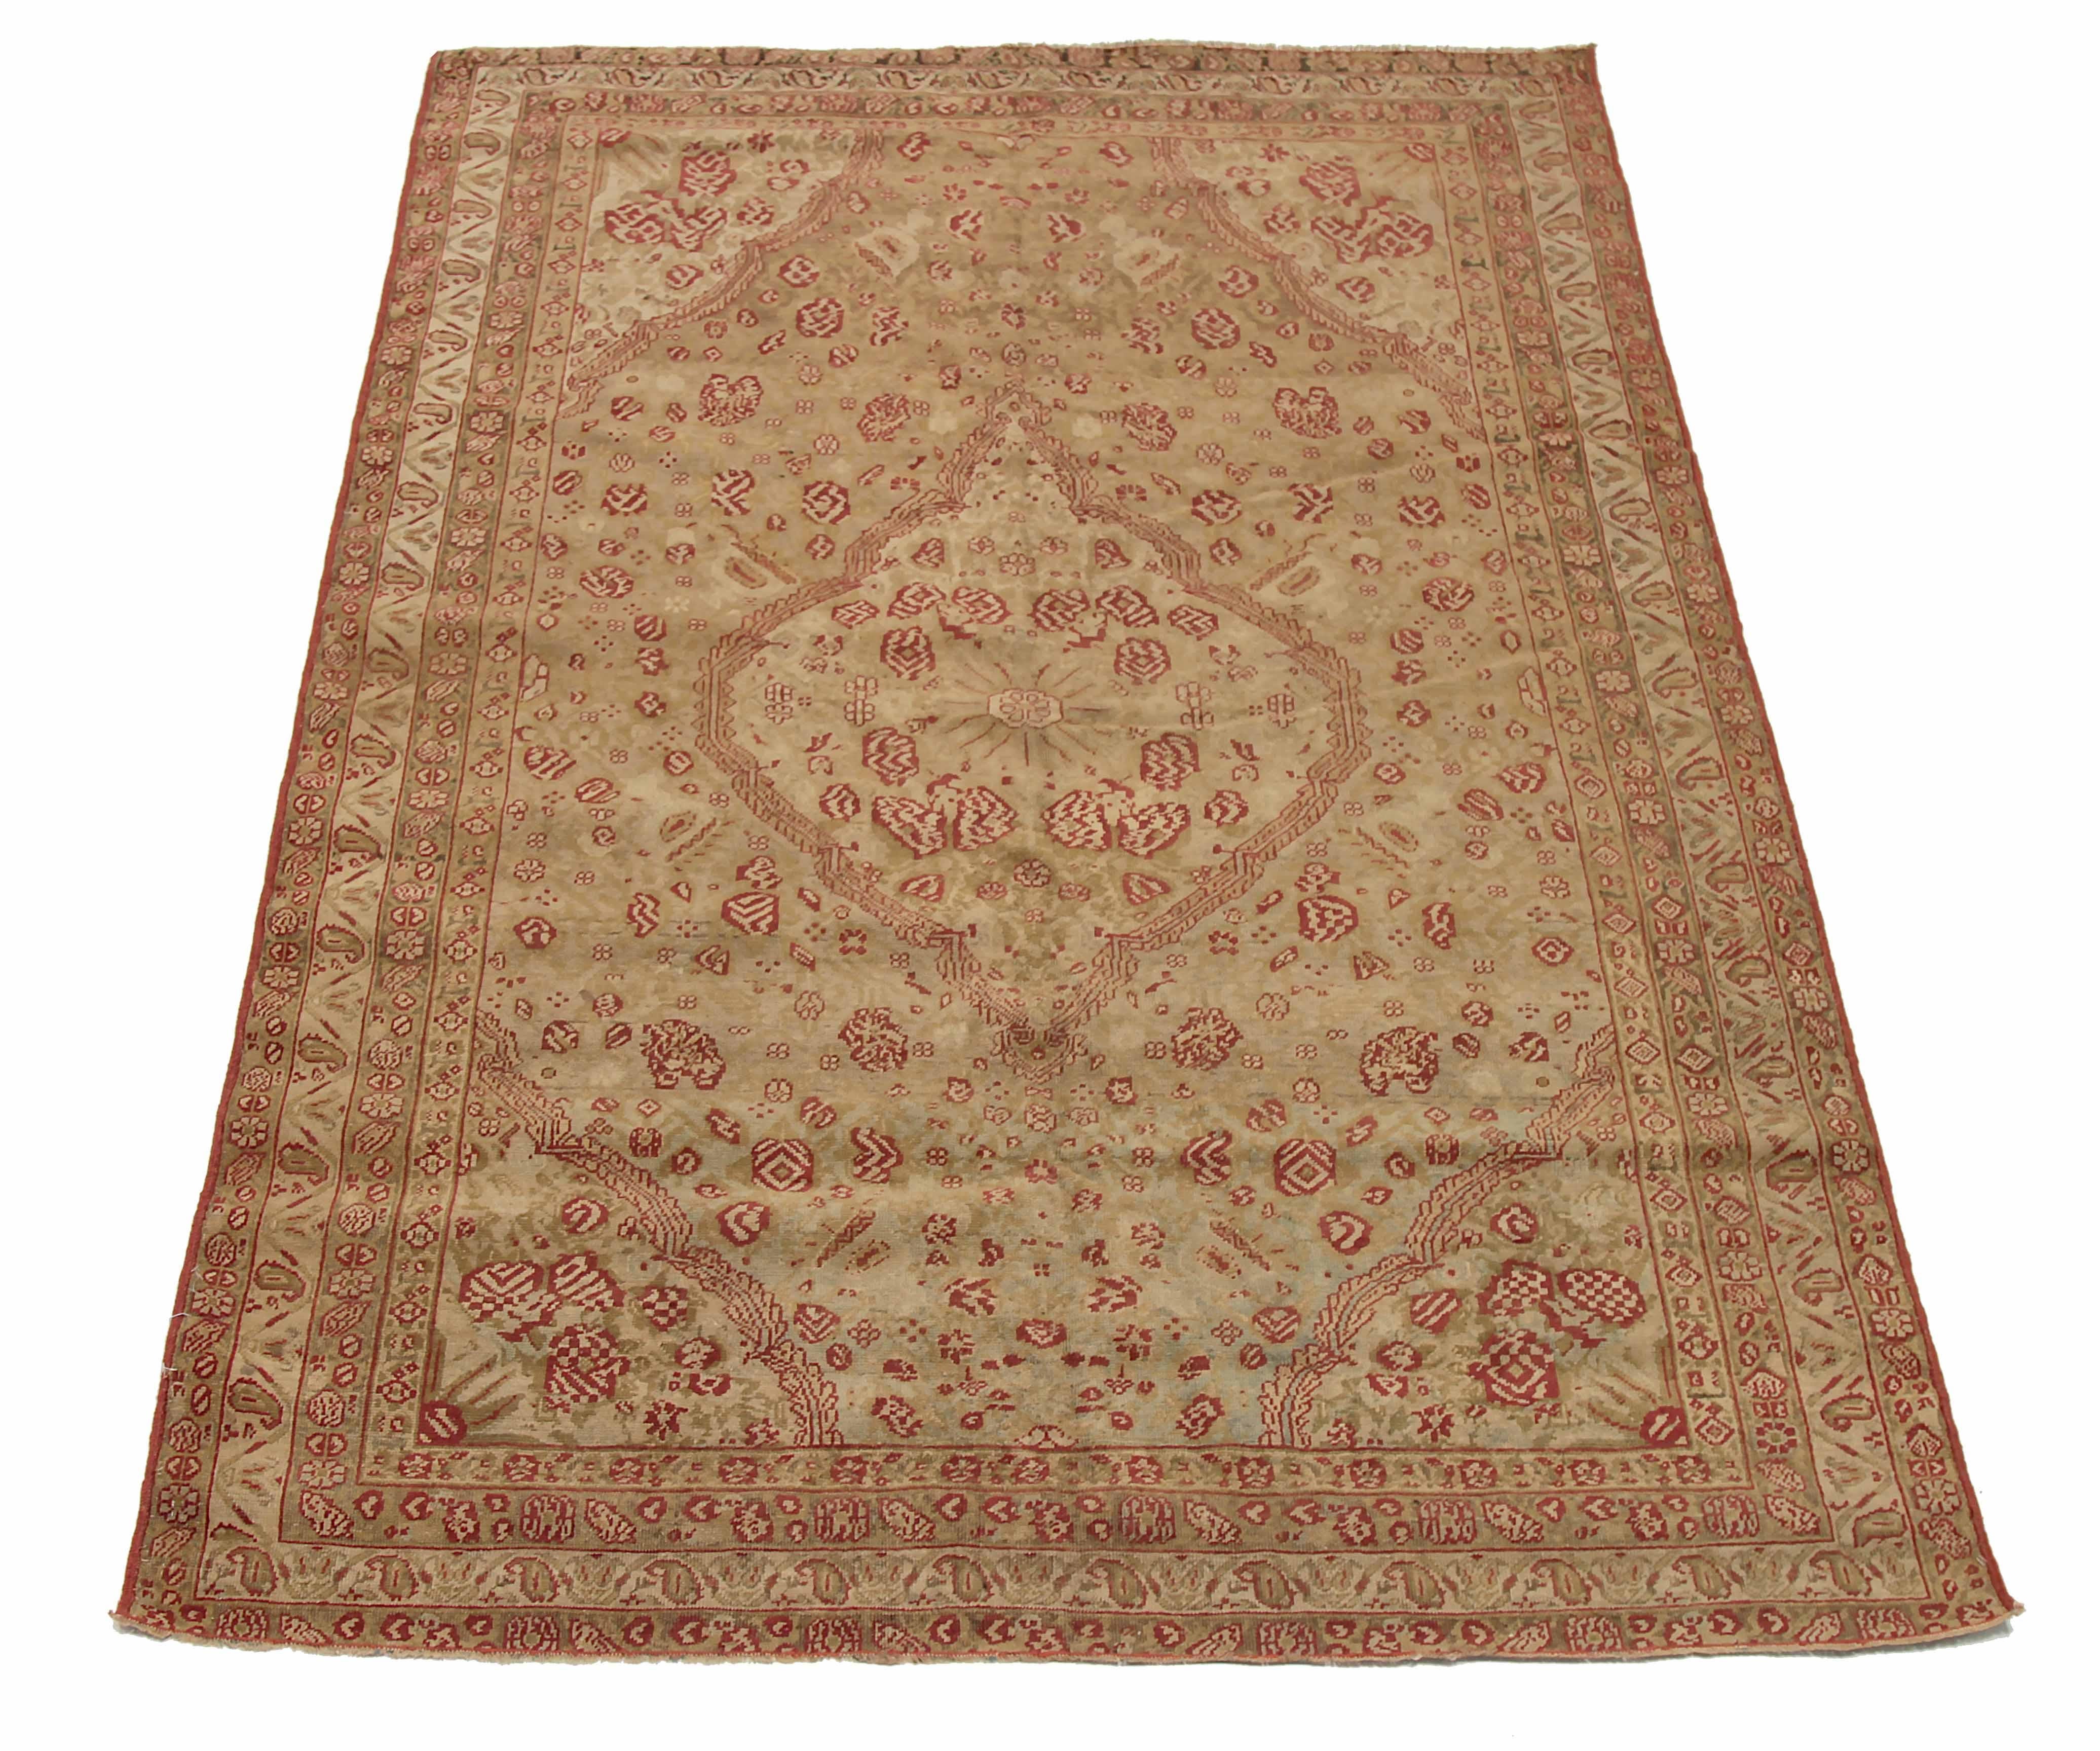 Antique Persian area rug handwoven from the finest sheep’s wool. It’s colored with all-natural vegetable dyes that are safe for humans and pets. It’s a traditional Ghatelo design handwoven by expert artisans. It’s a lovely area rug that can be